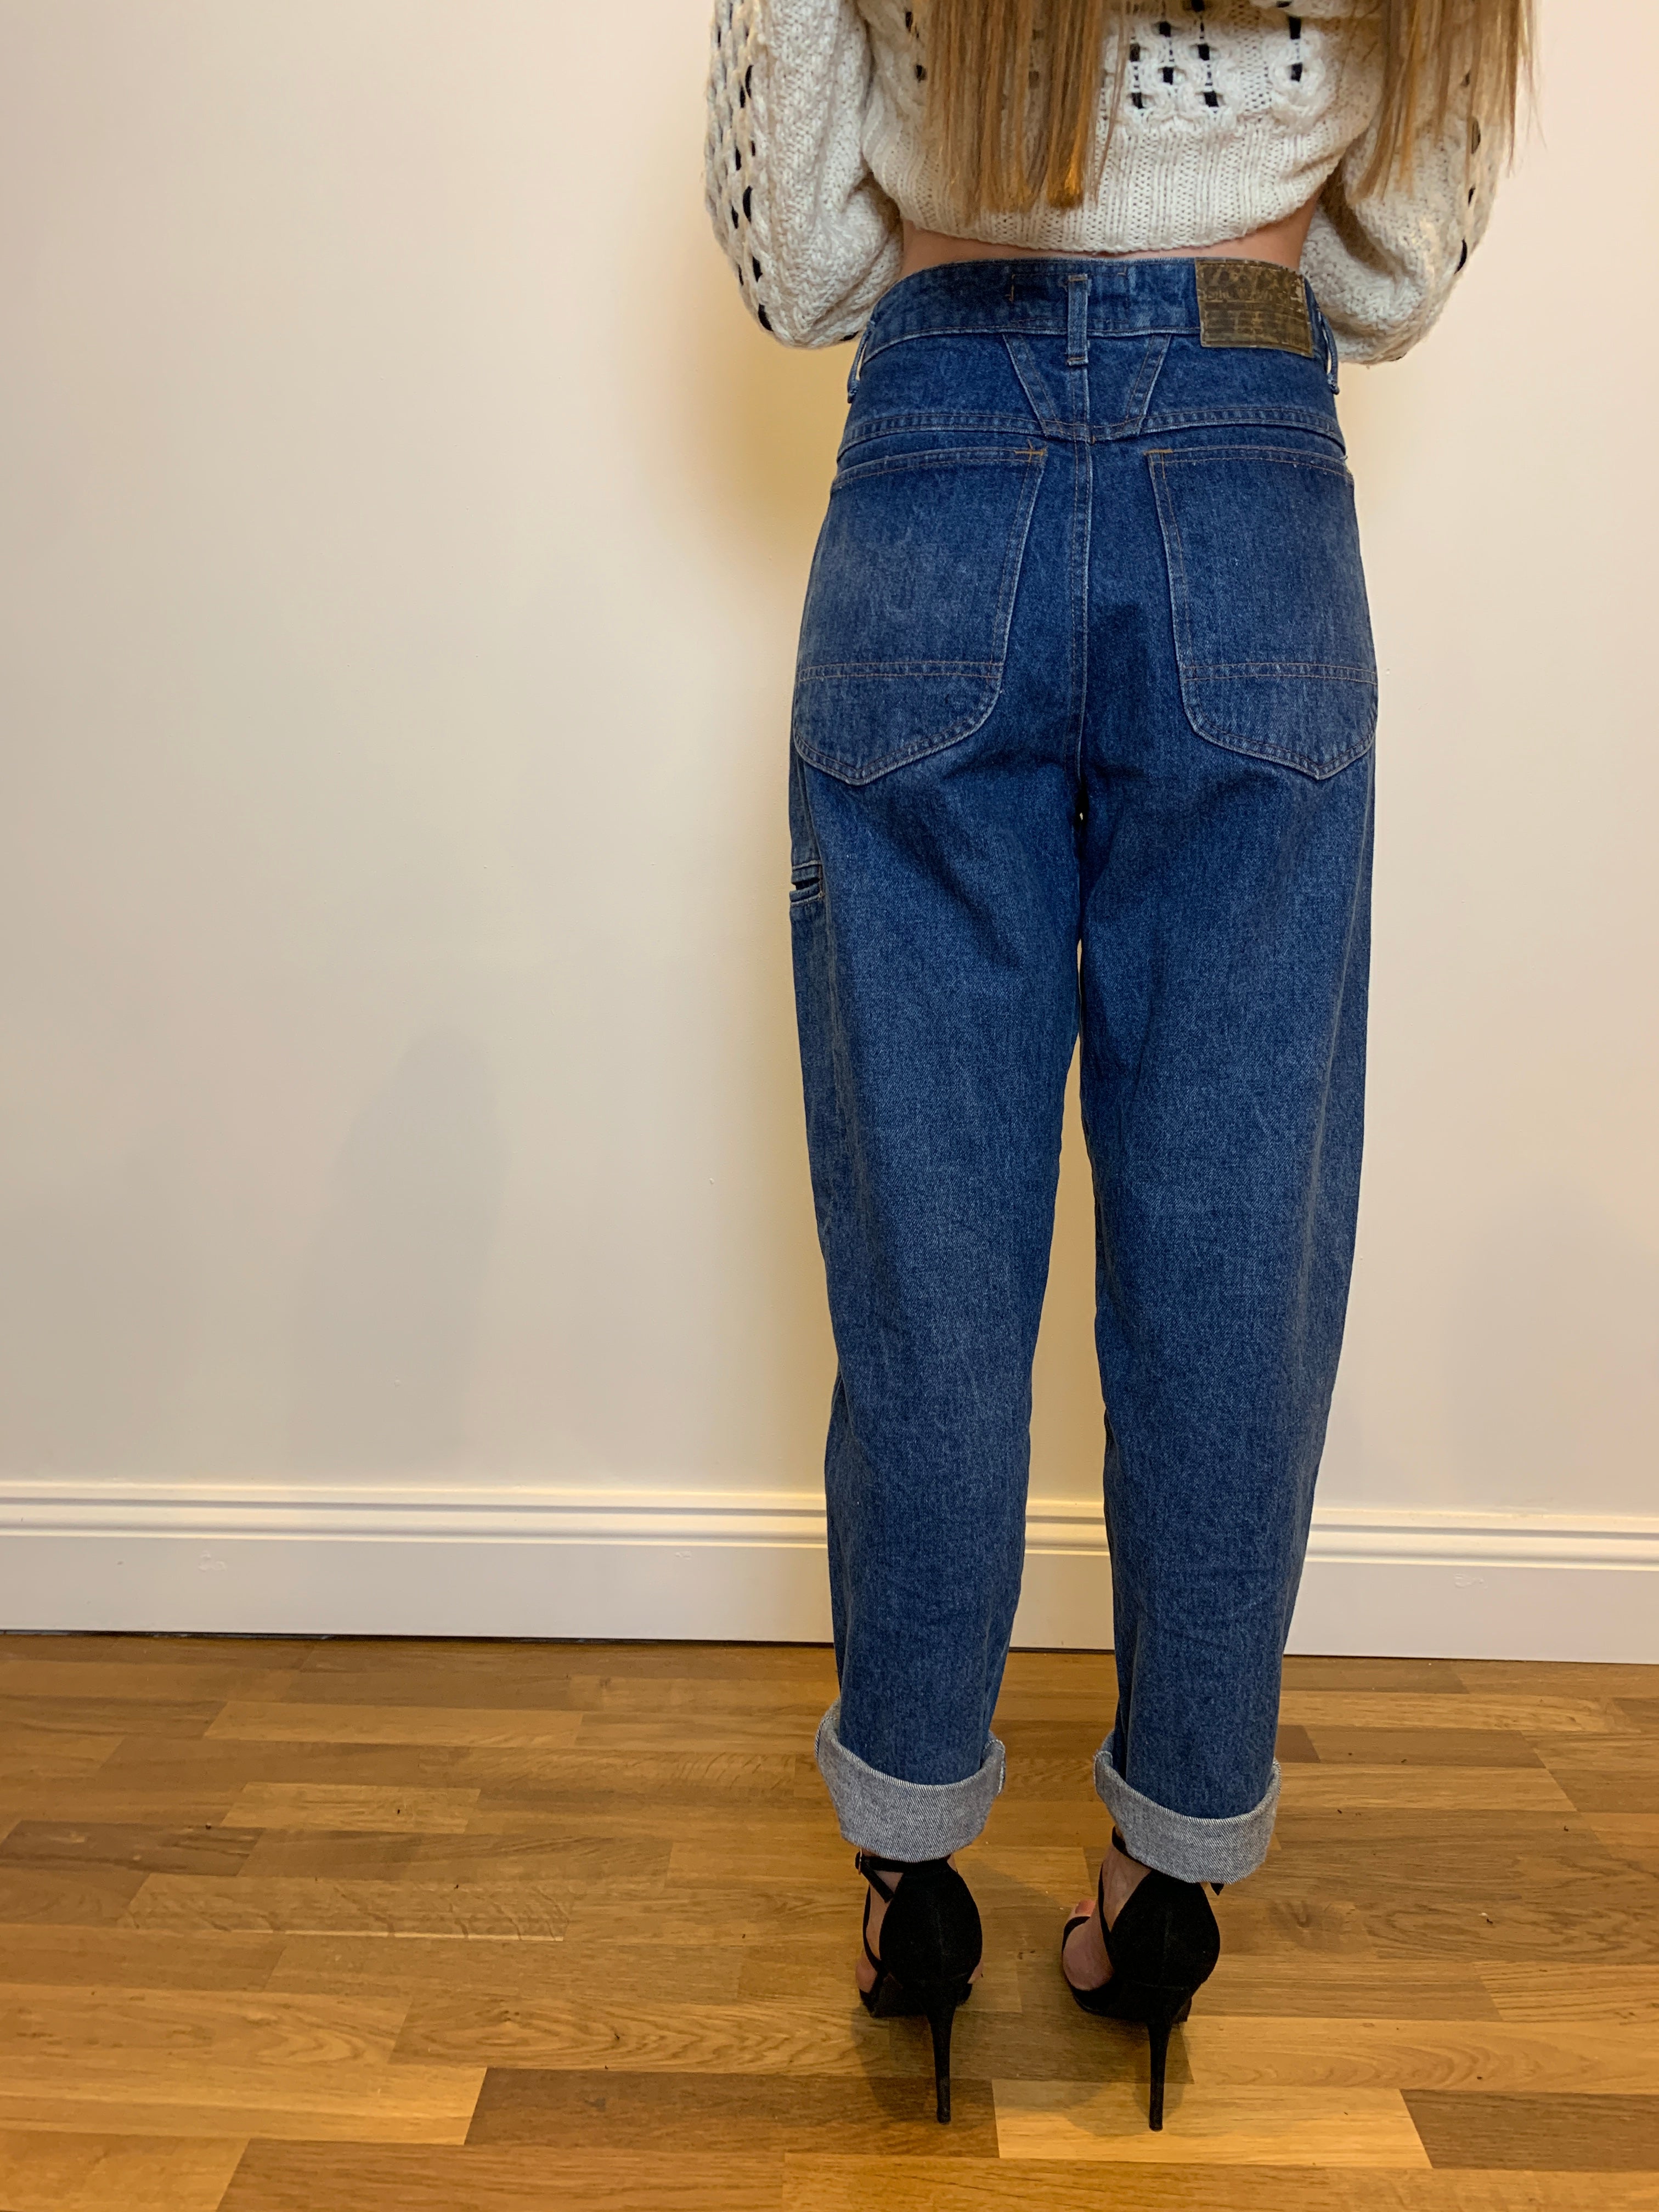 Closed 1990s vintage high waisted baggy jeans